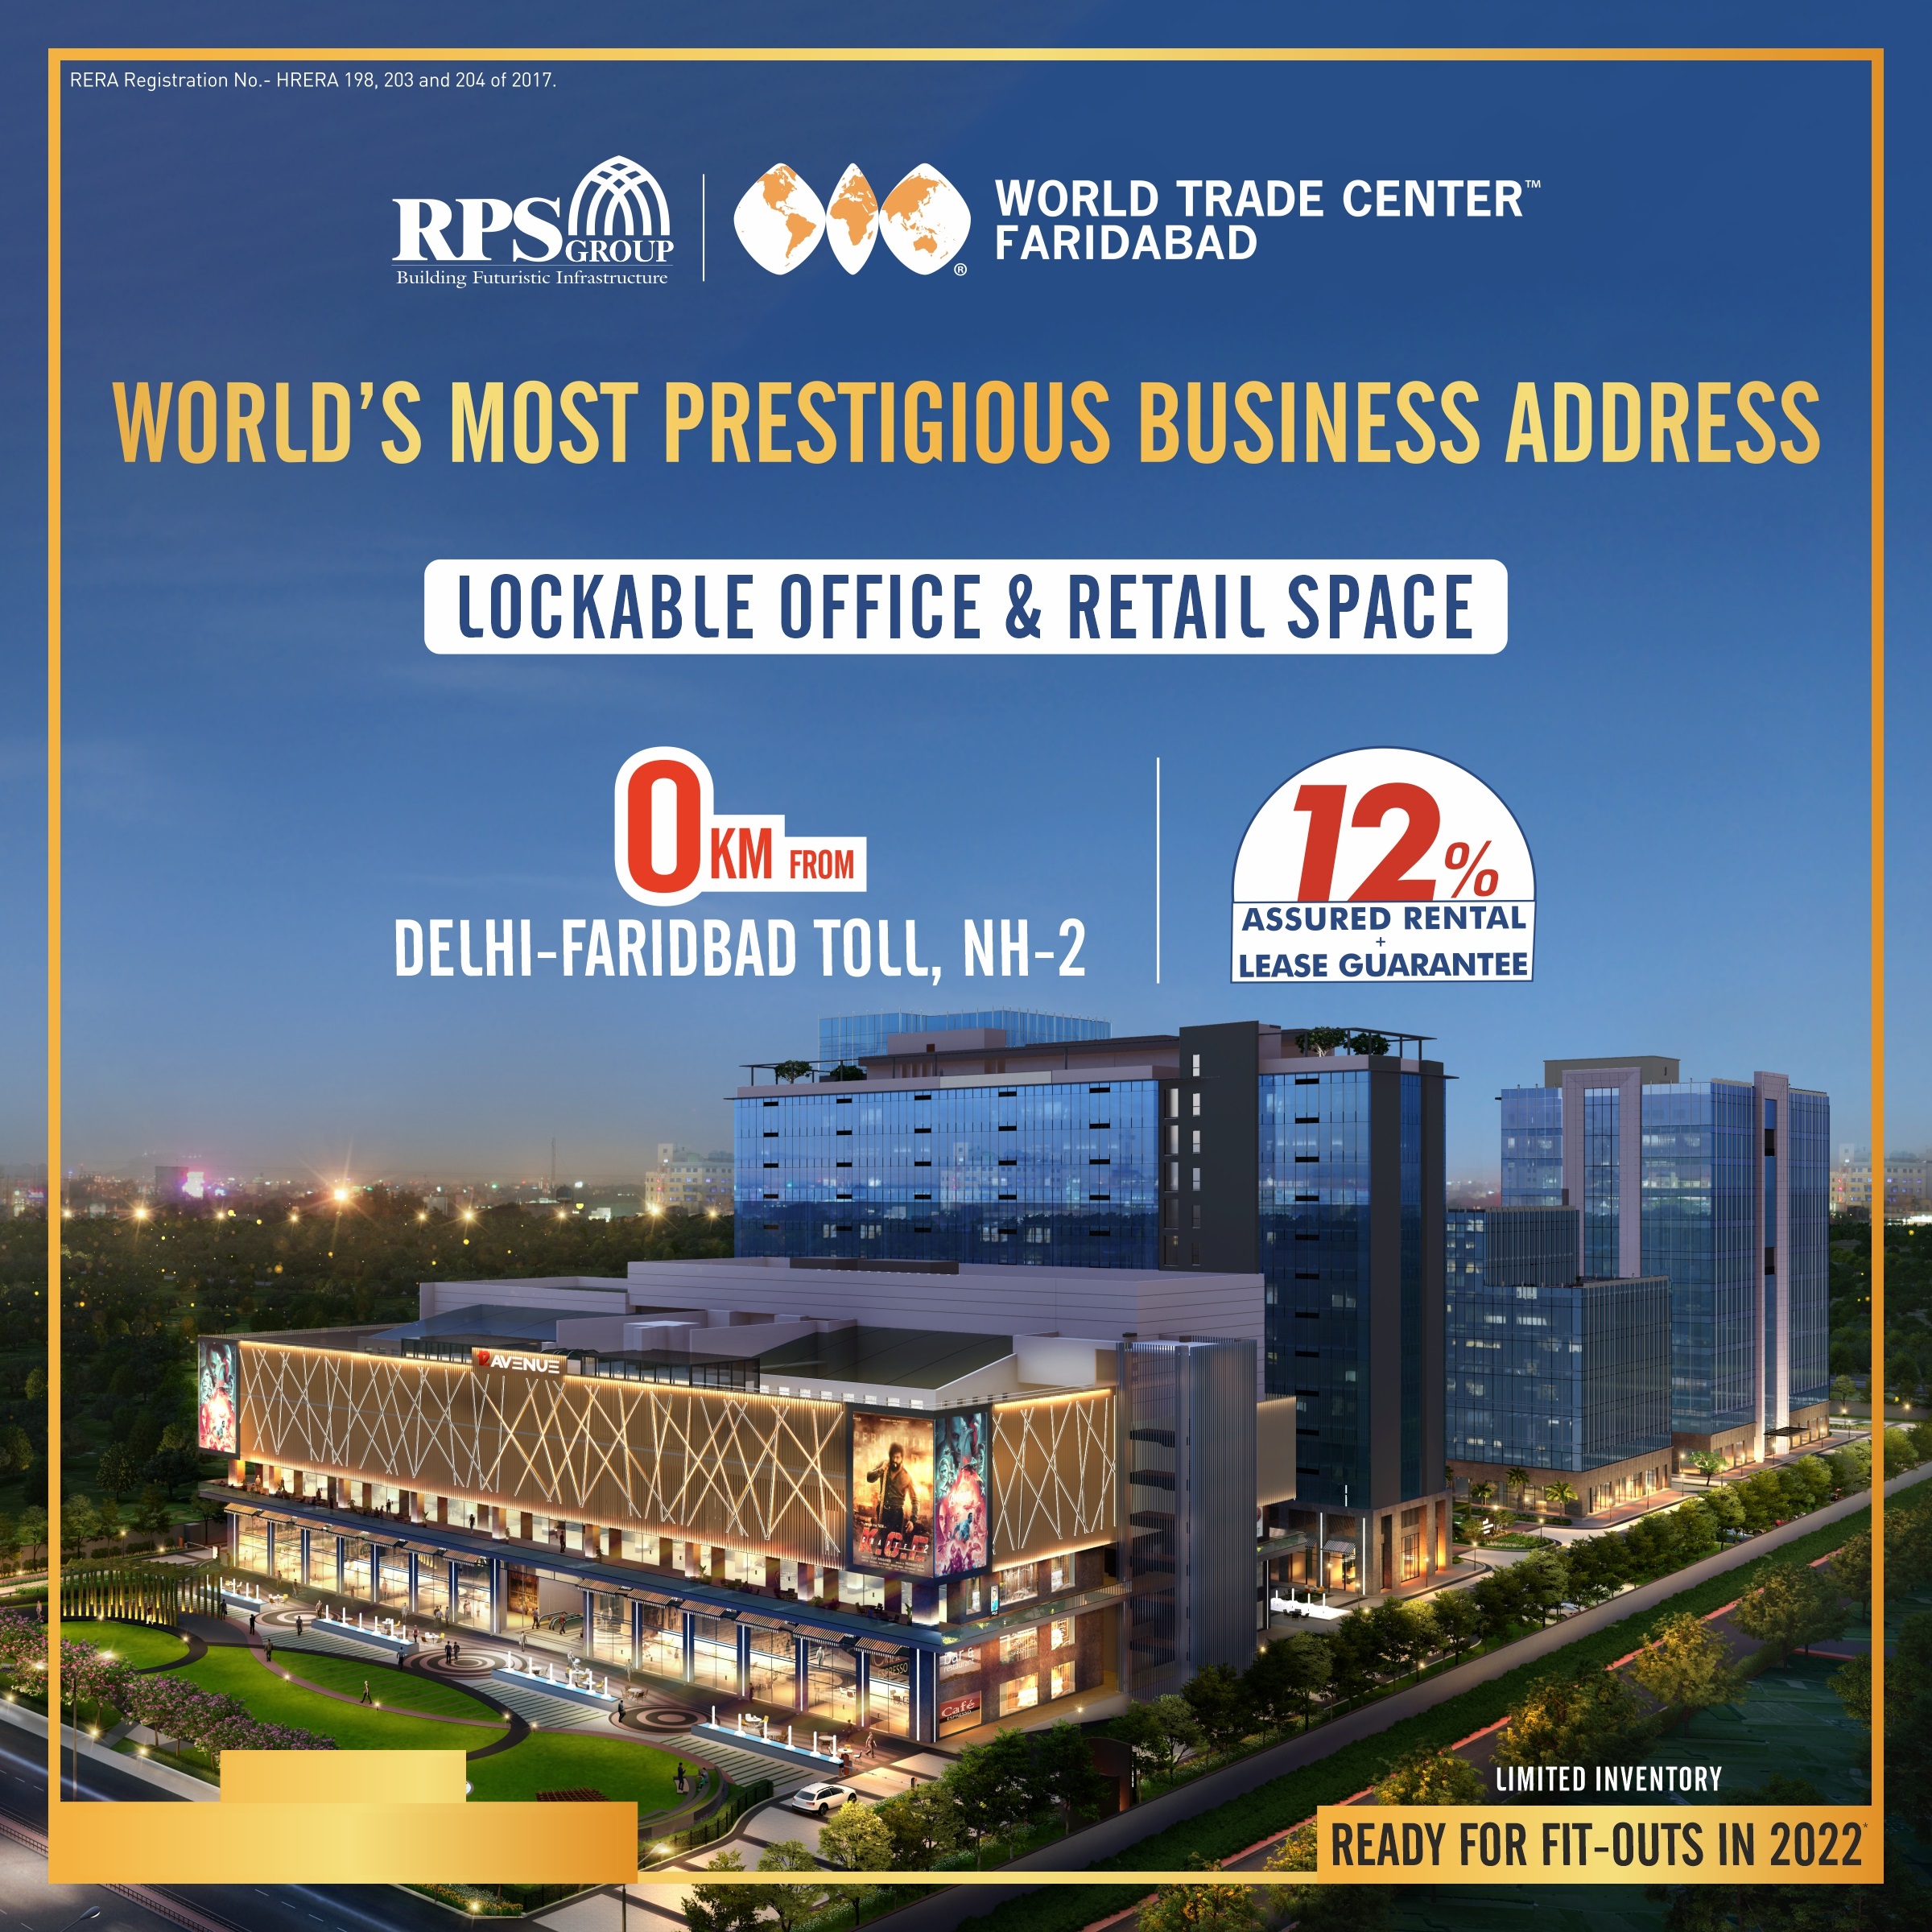 Lockable office and retail space at RPS World Trade Center, Faridabad Update